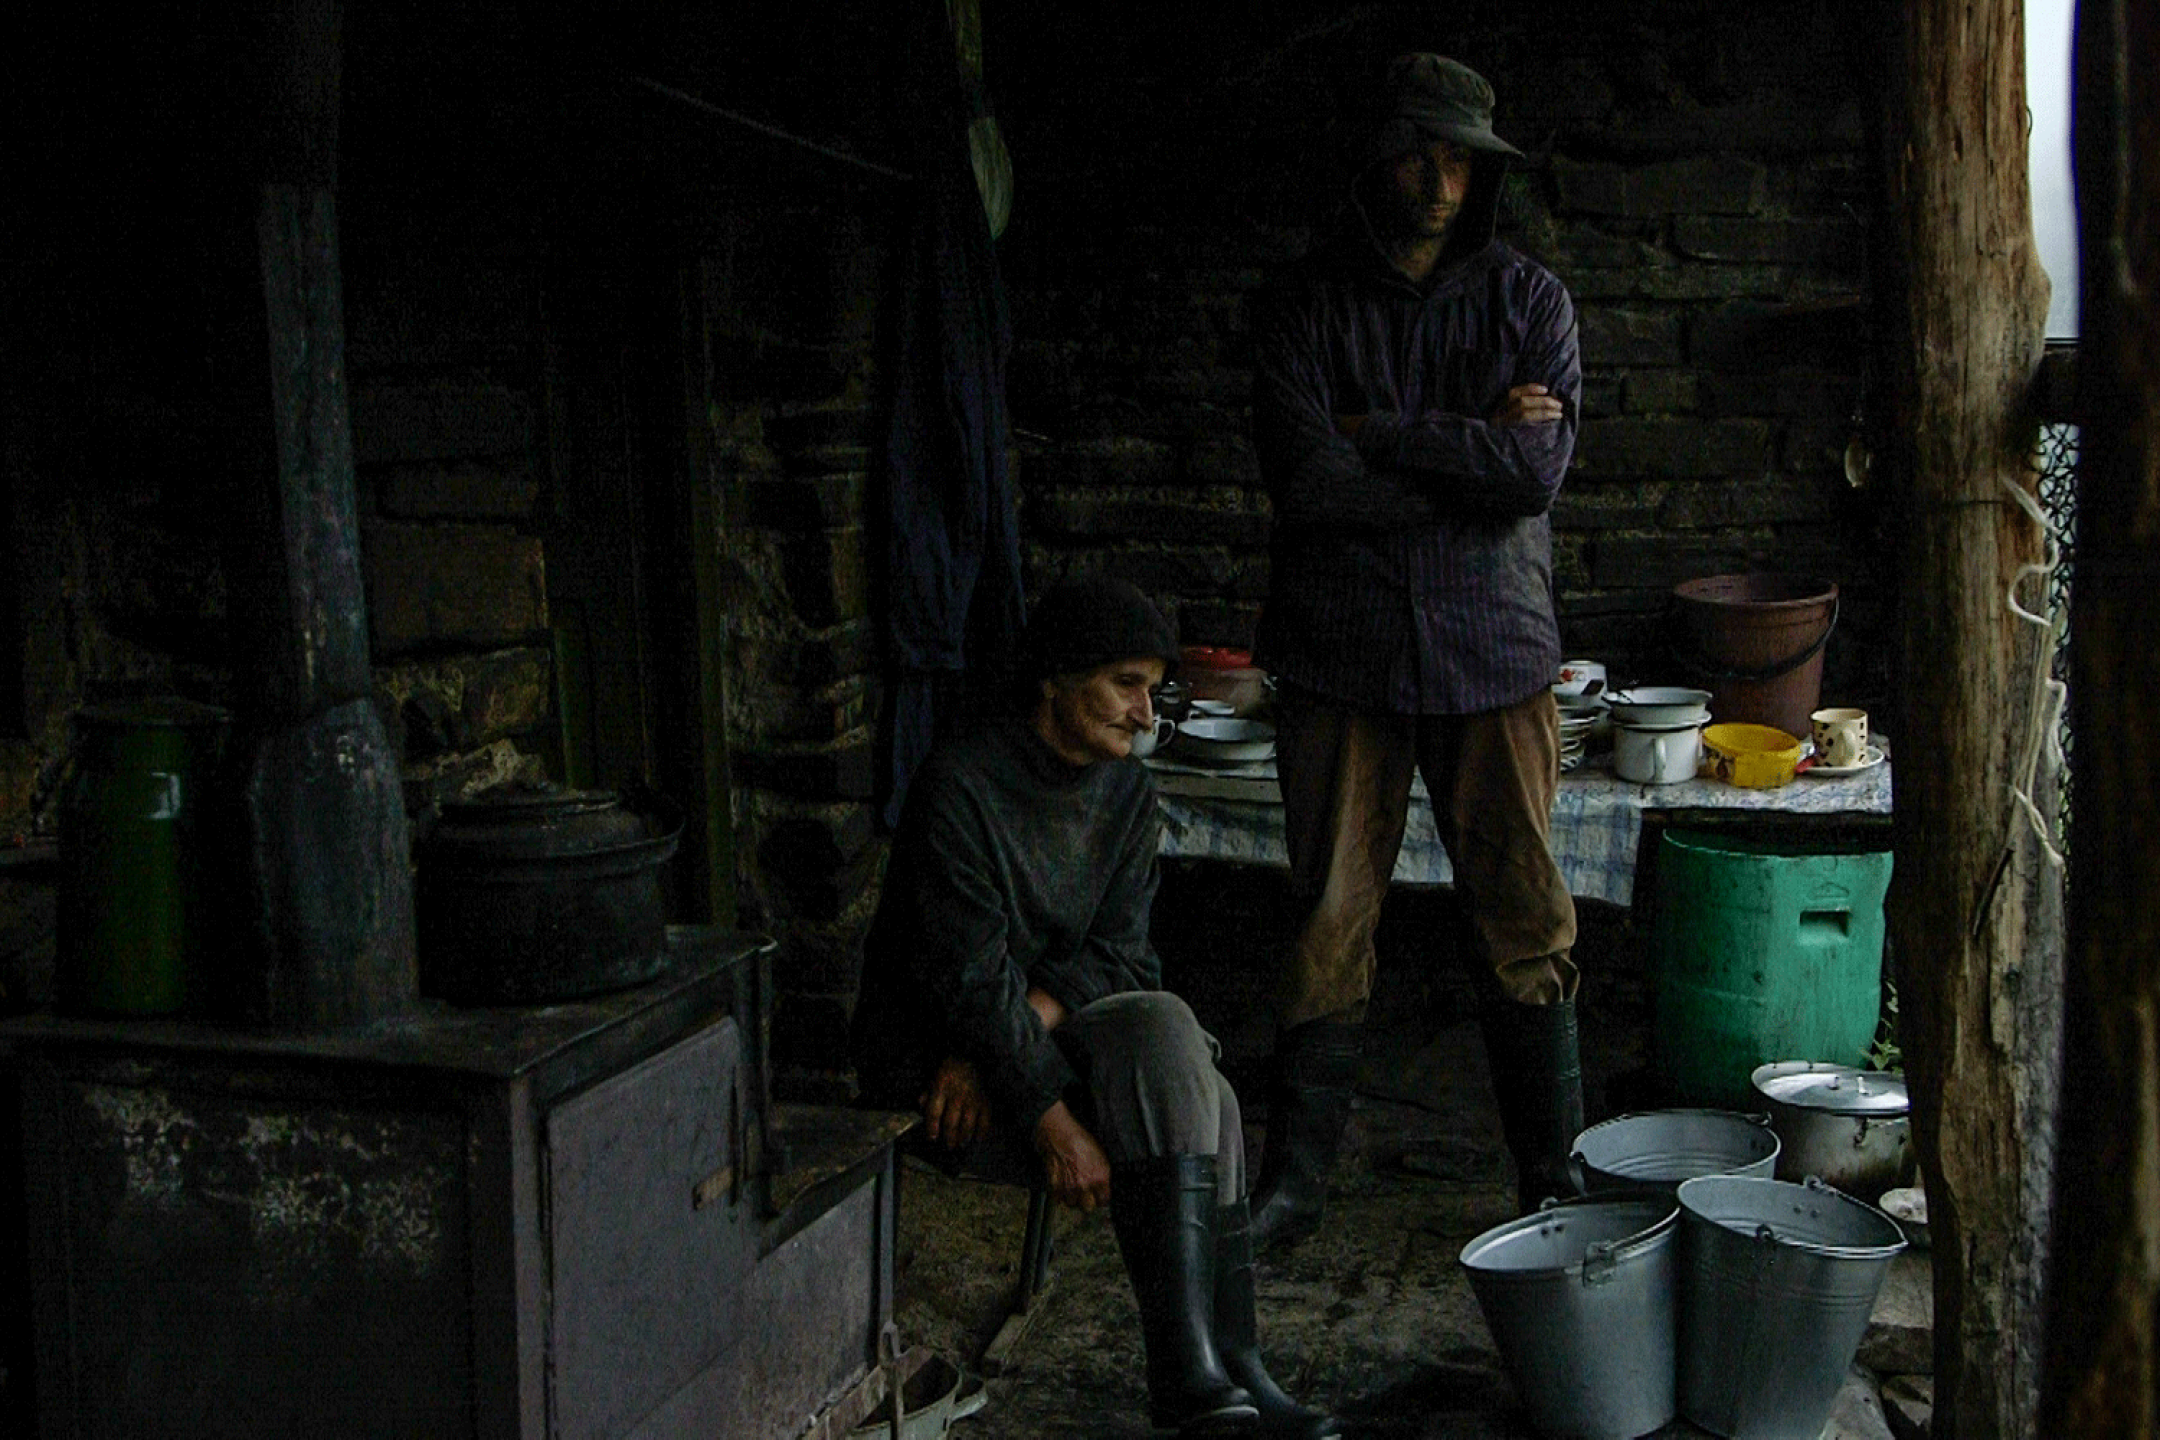 A man and an elderly woman in between stacks of buckets and bowls.